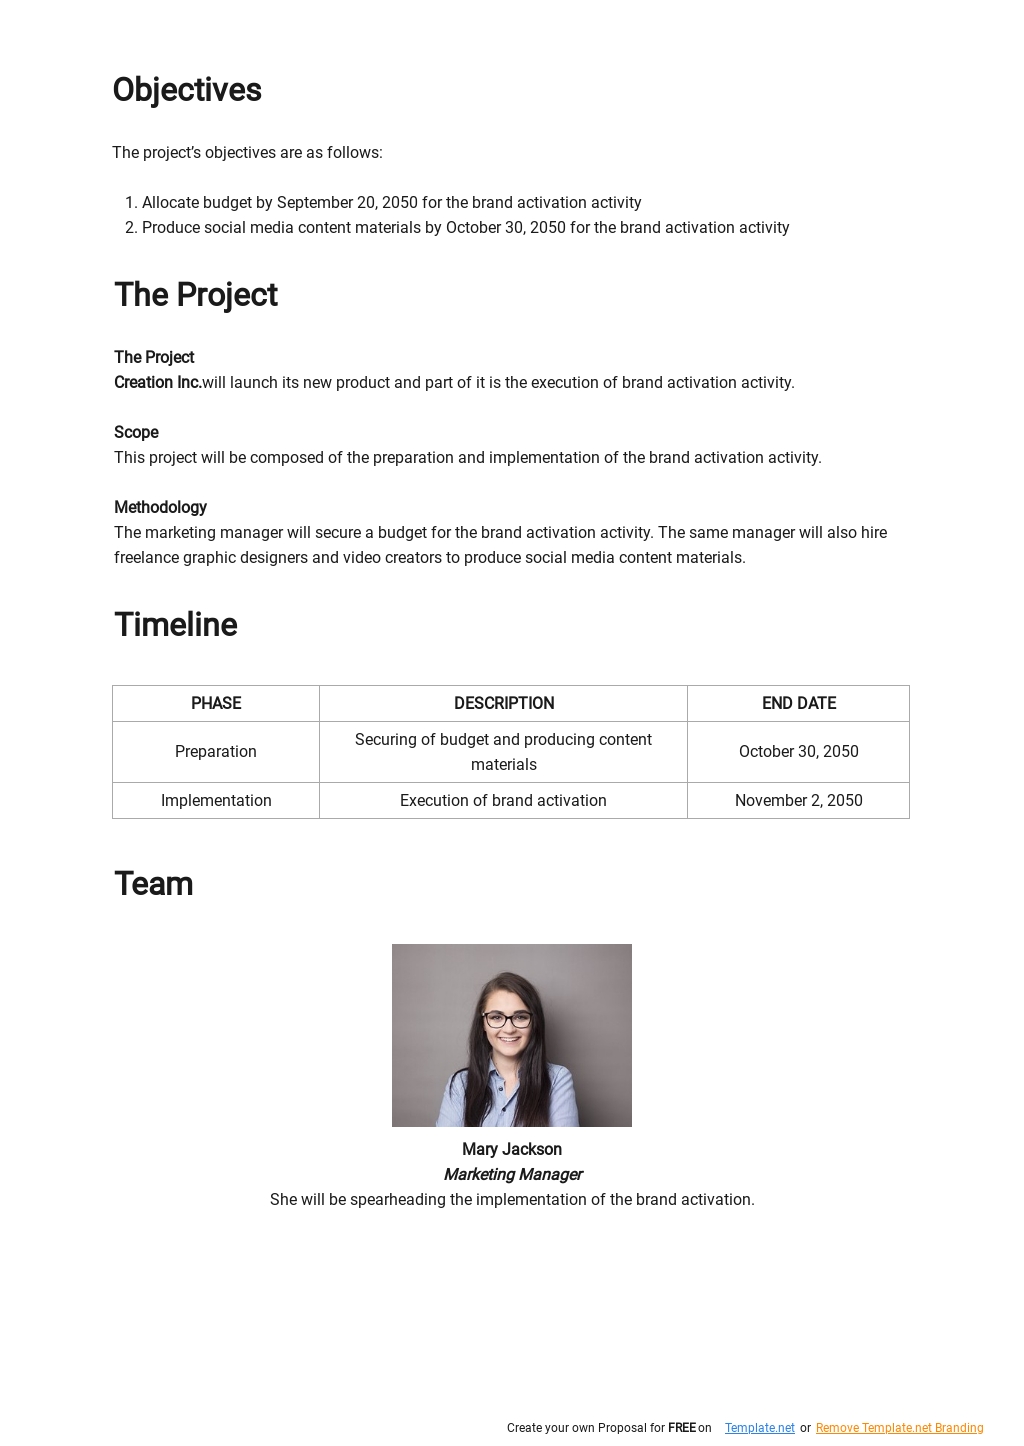 Brand Activation Plan Format Template in Google Docs, Word